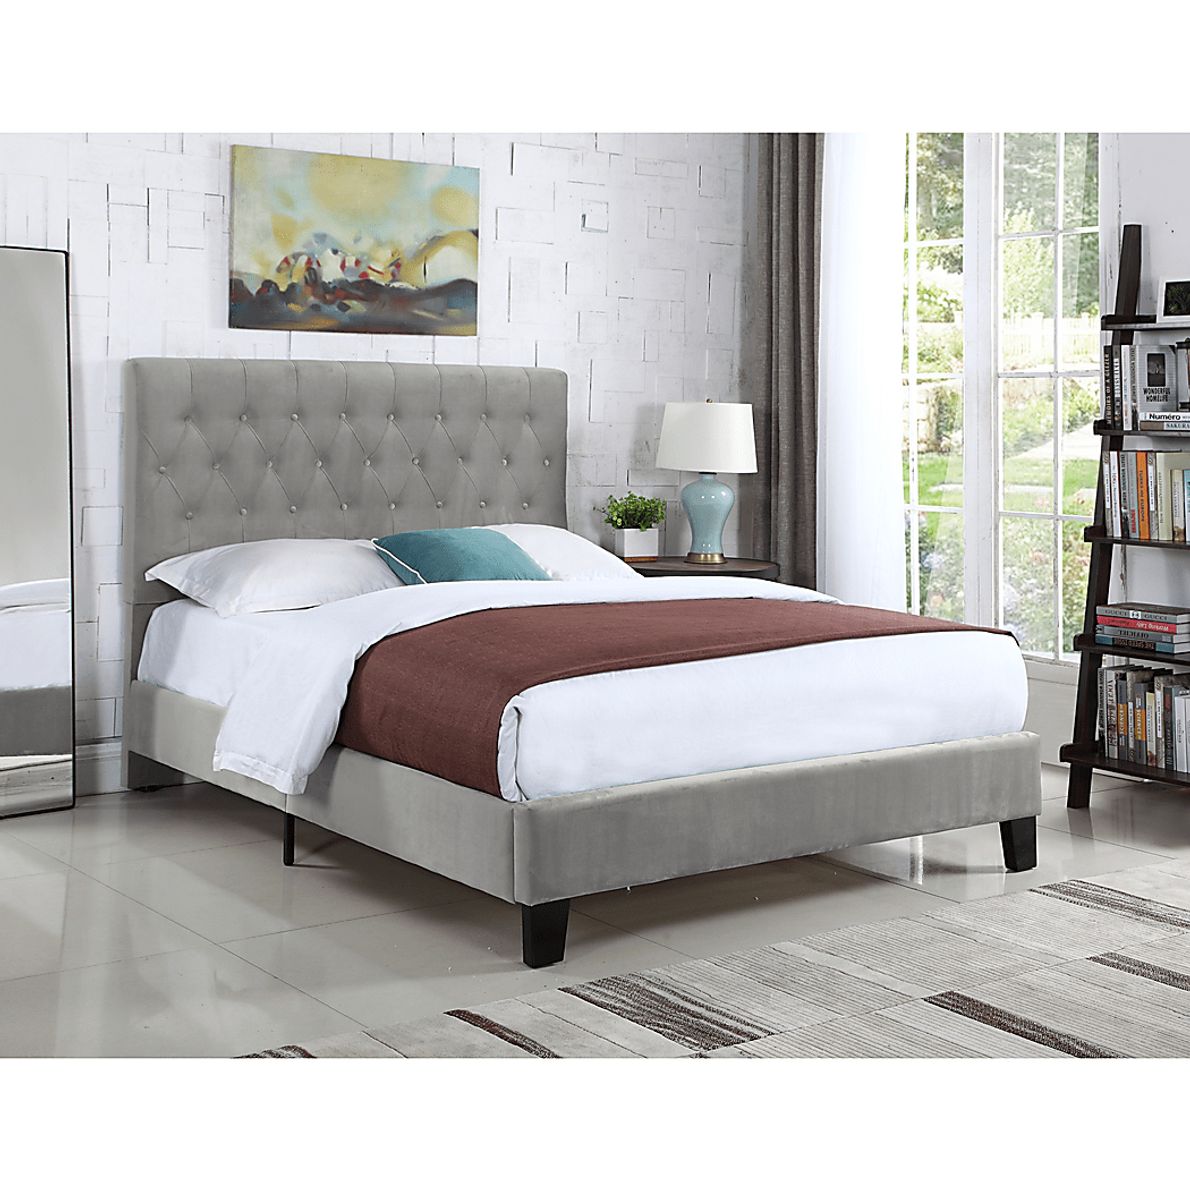 Ambiwood Light Gray Queen Bed